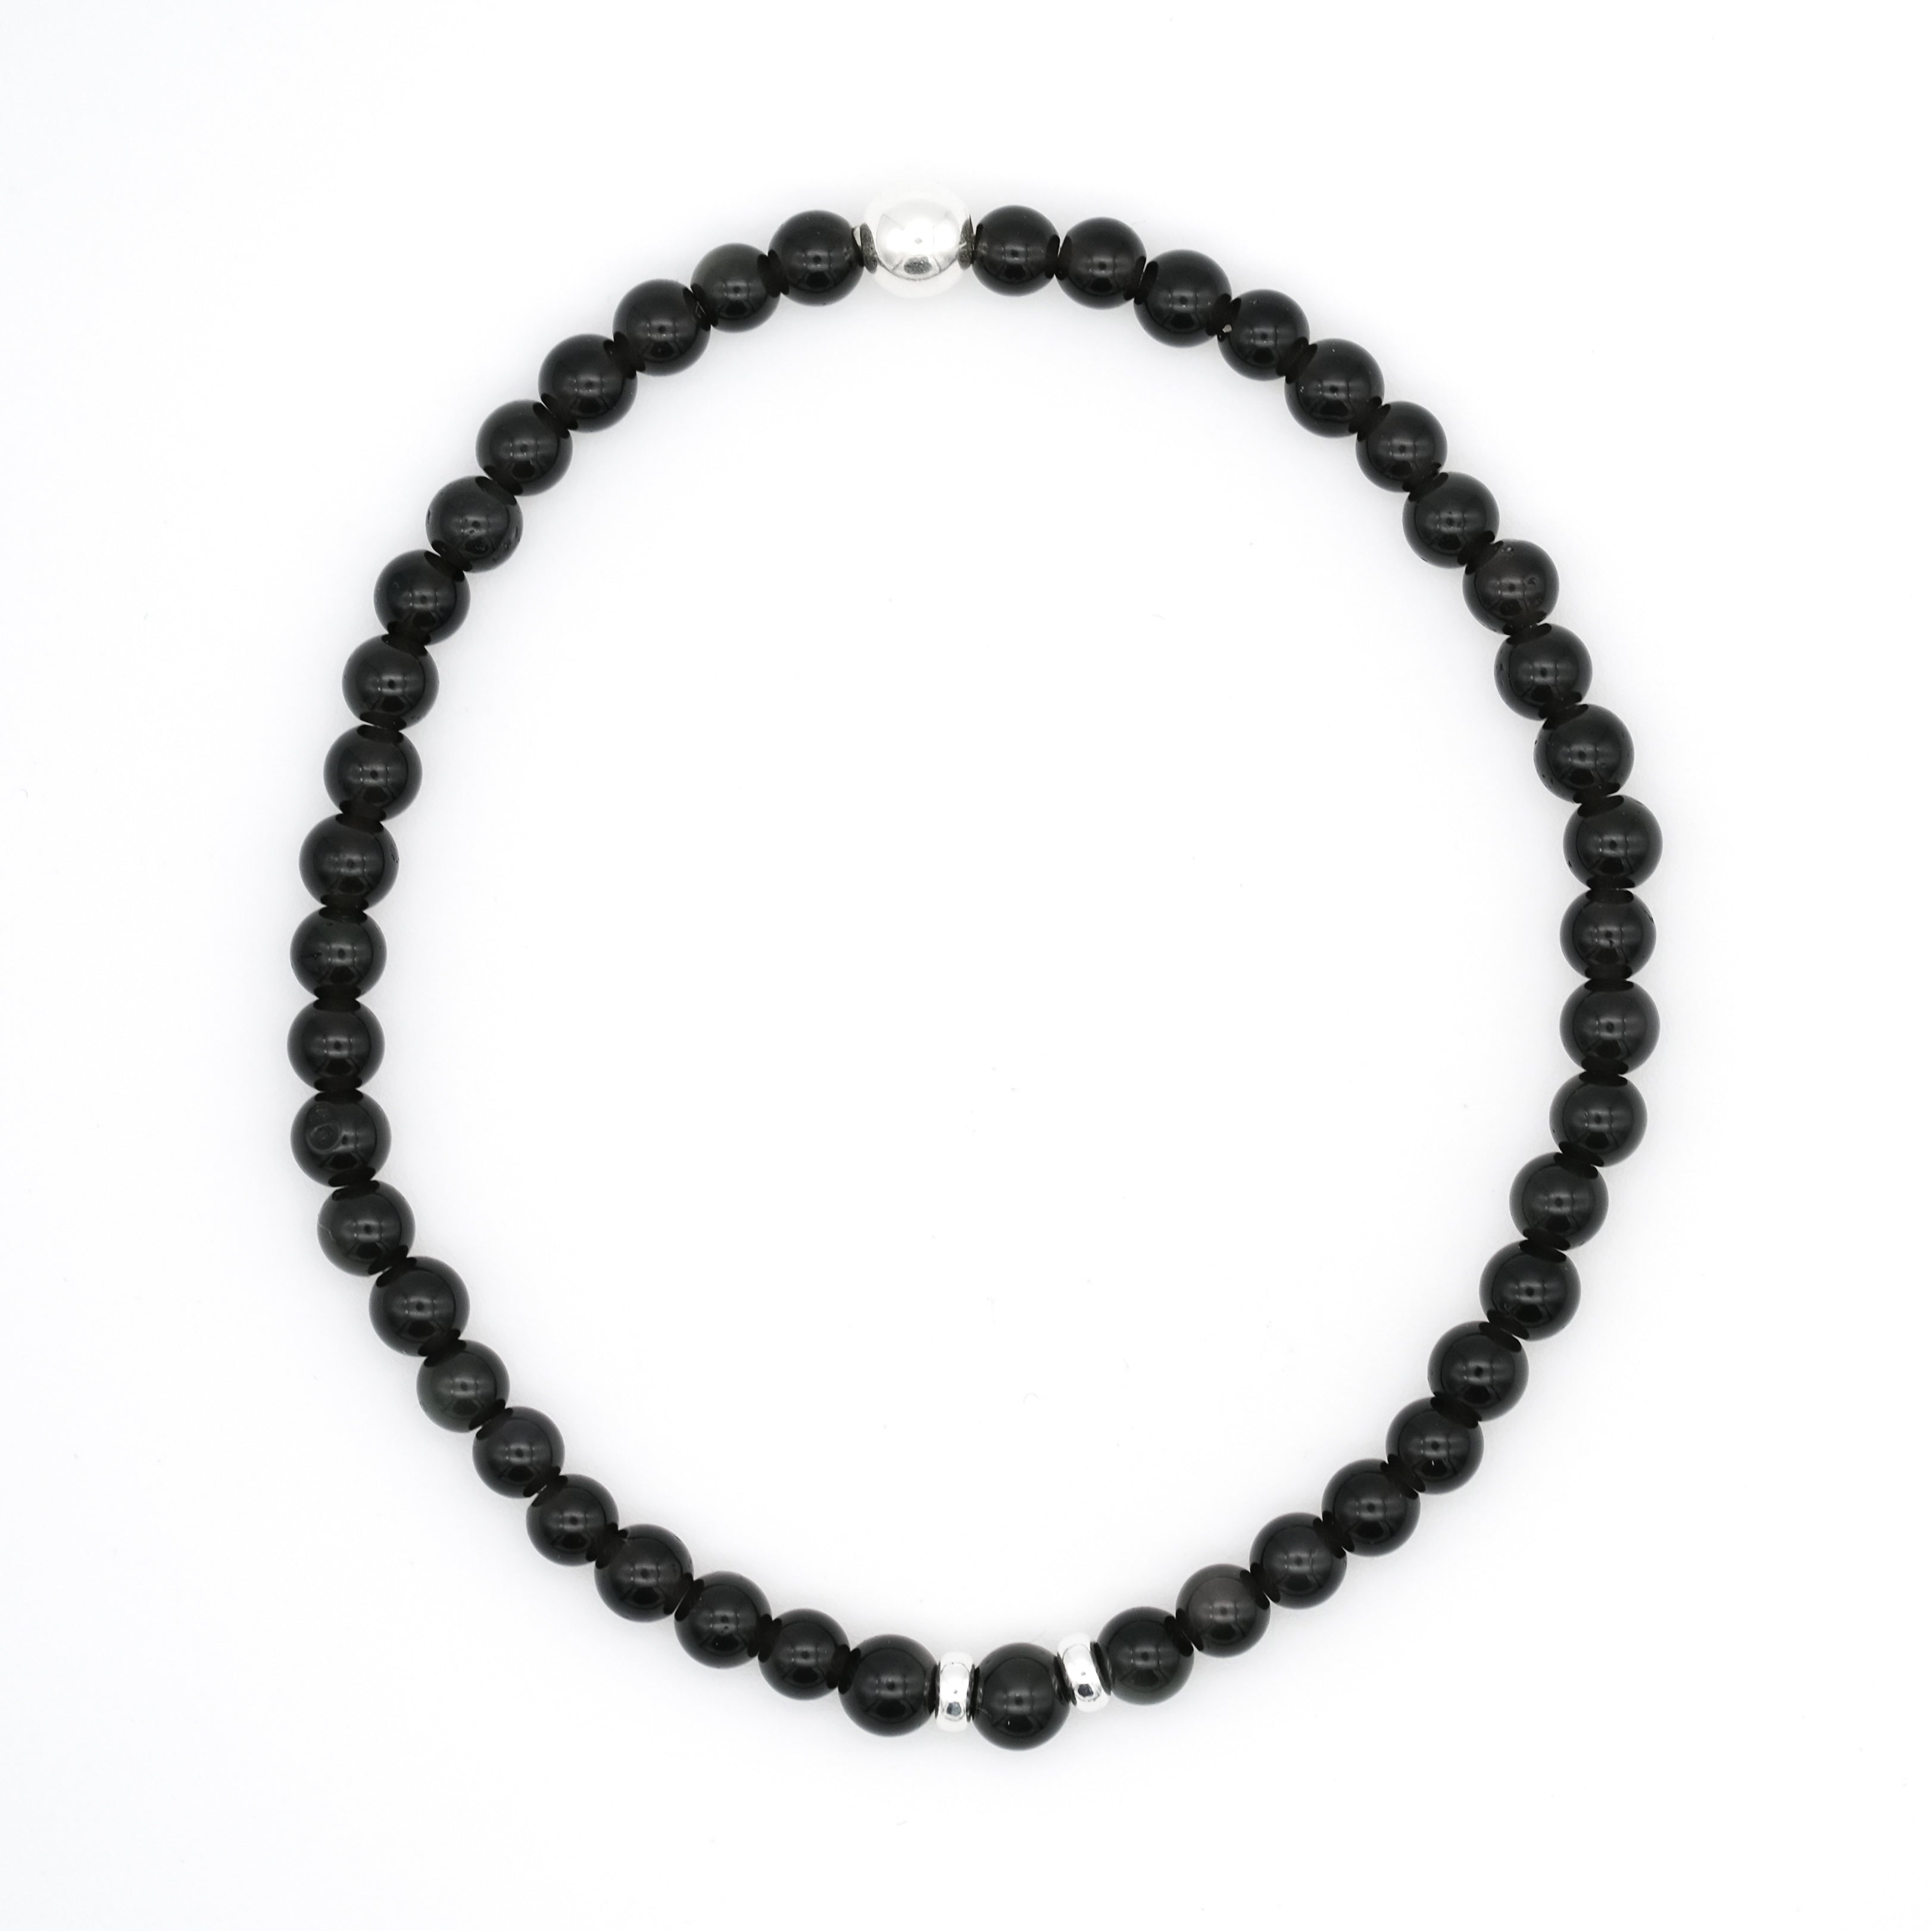 A Black obsidian gemstone bracelet in 4mm beads with silver accessories from above